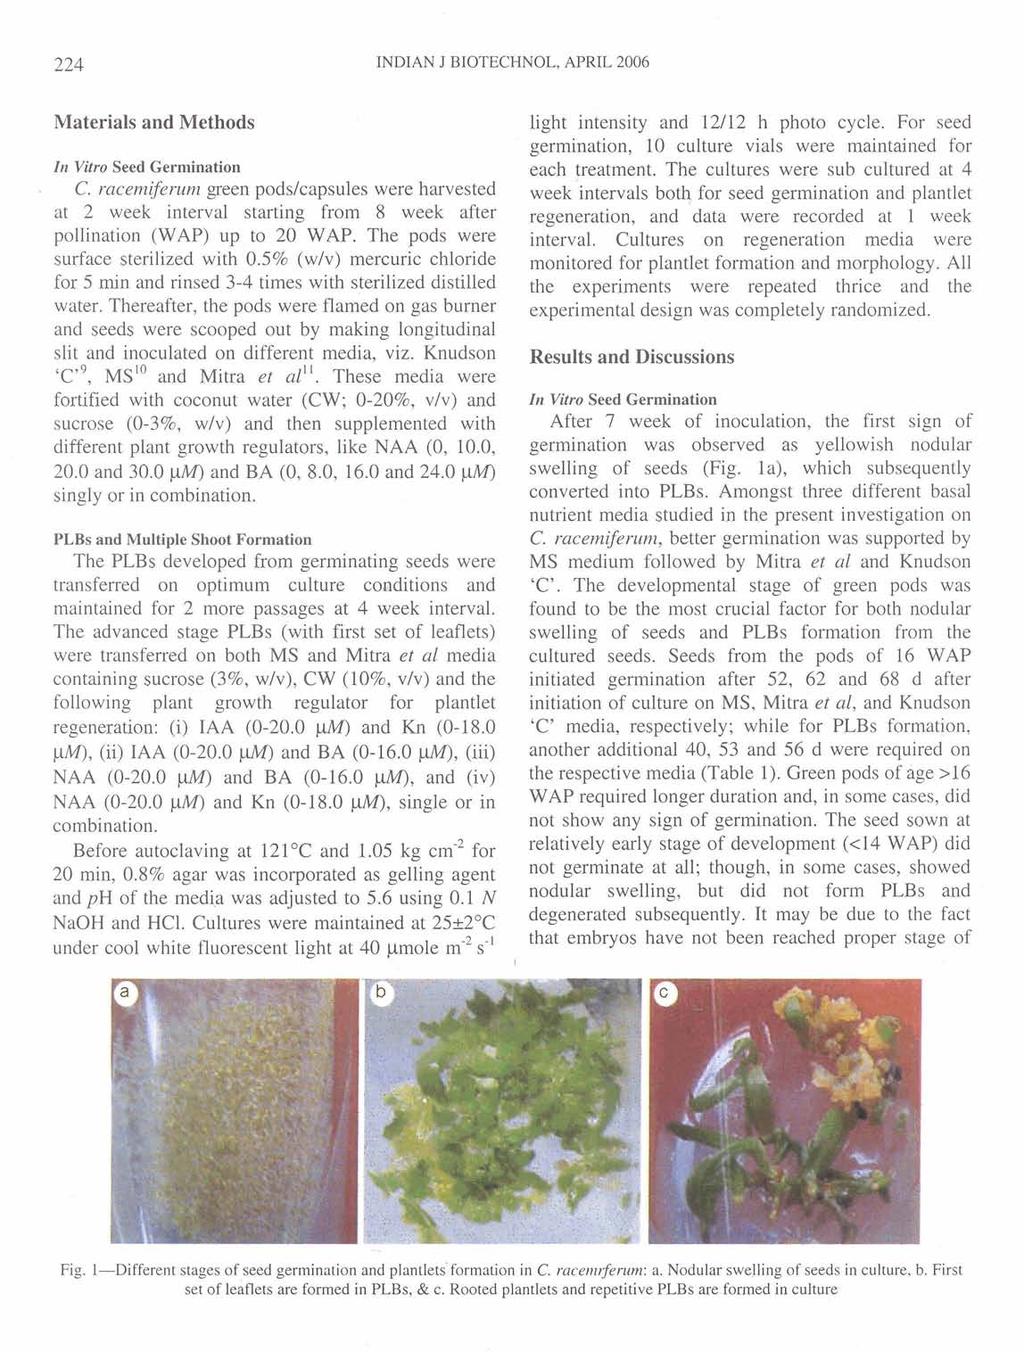 INDIAN J BIOTECHNOL. APRIL 2006 Materials and Methods In Vitro Seed Germination, C.